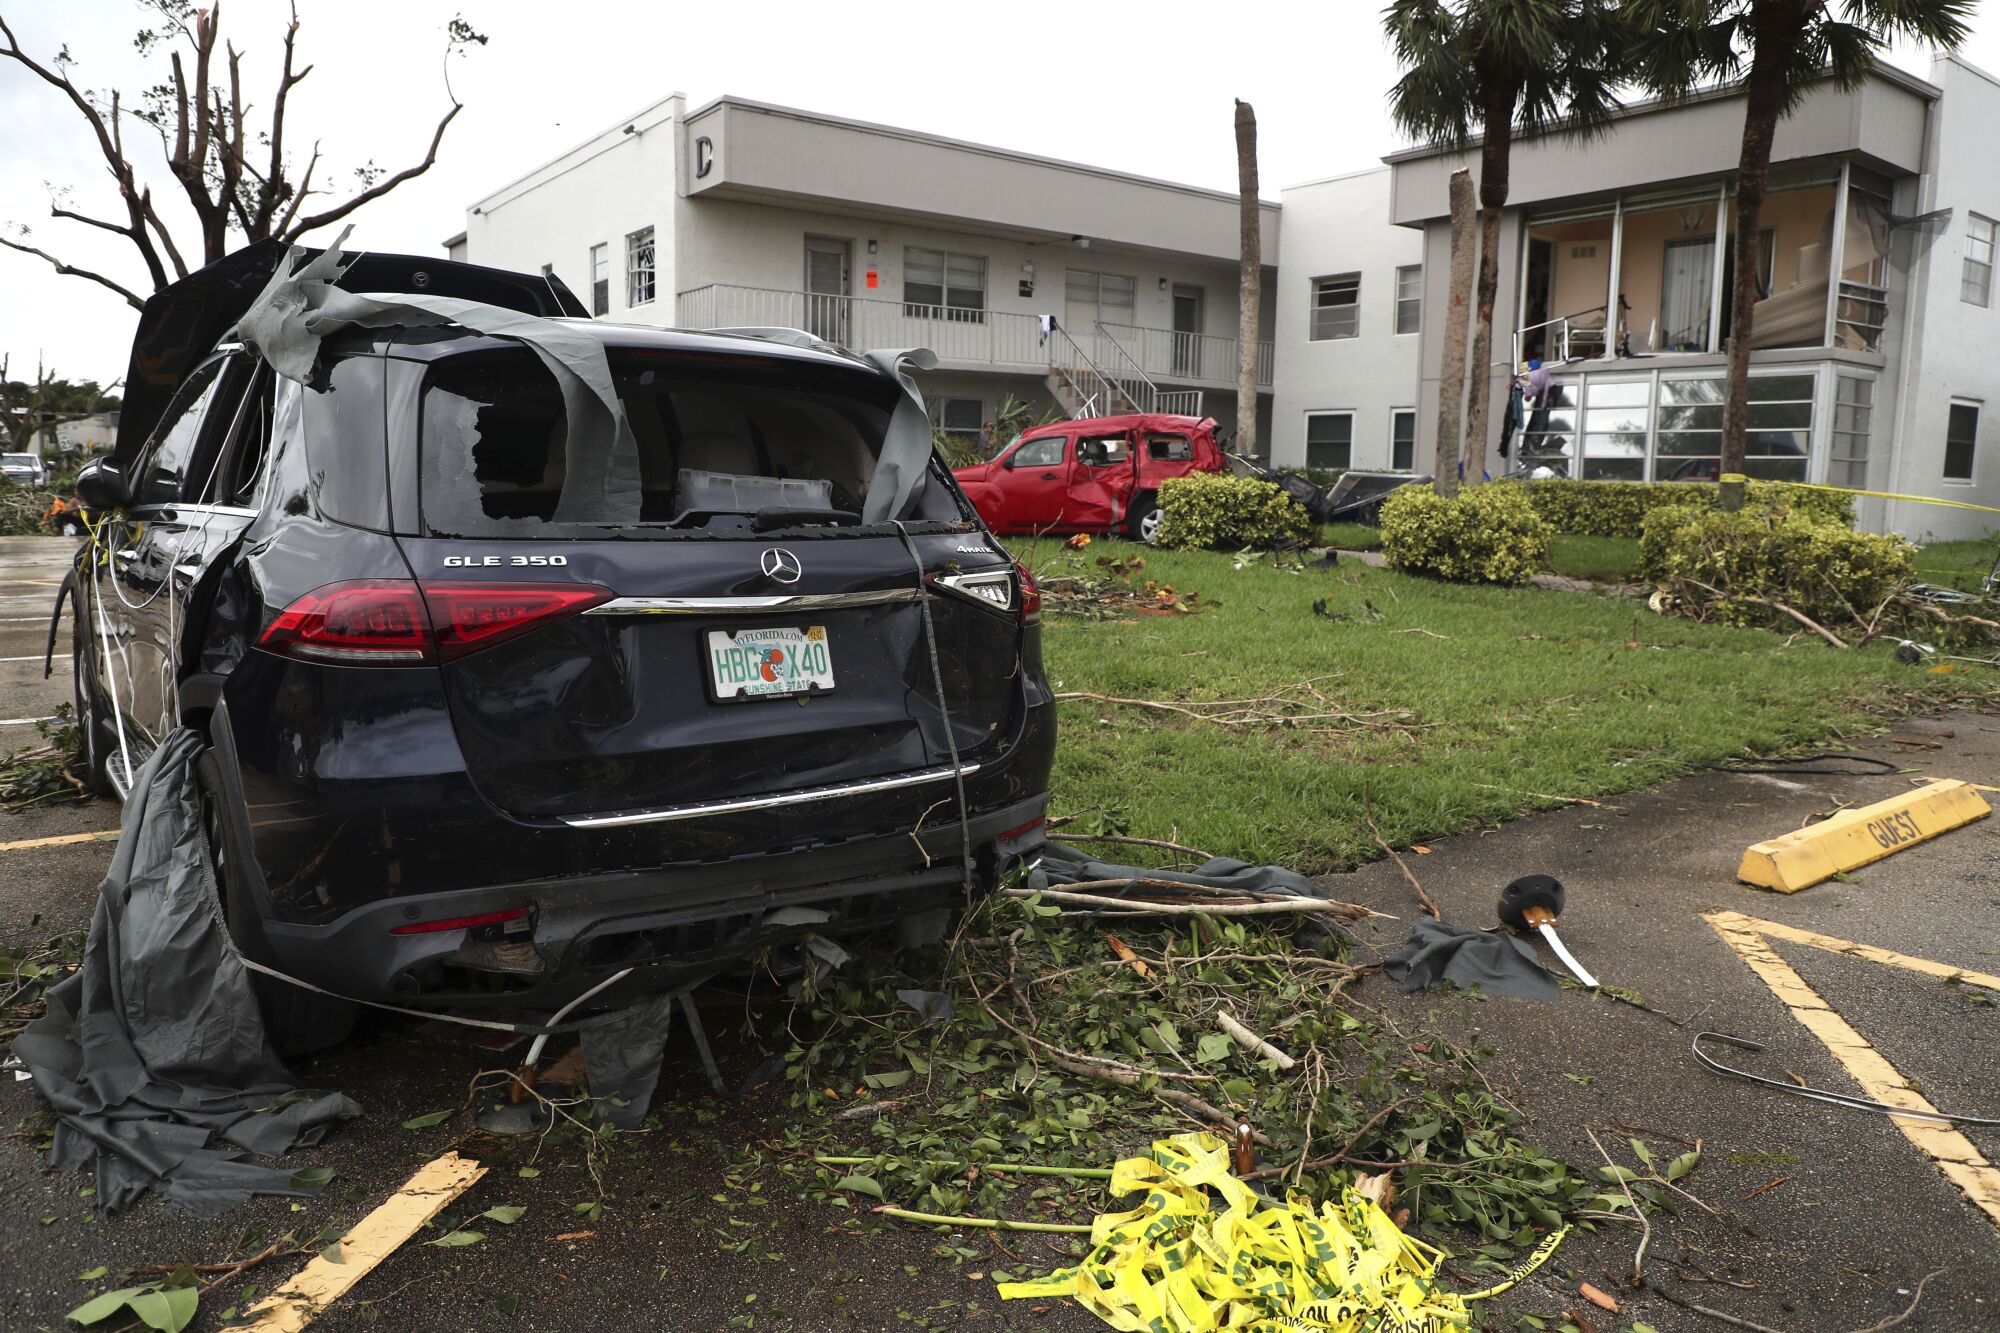 Cars damaged from an apparent overnight tornado in Delray Beach, Fla.